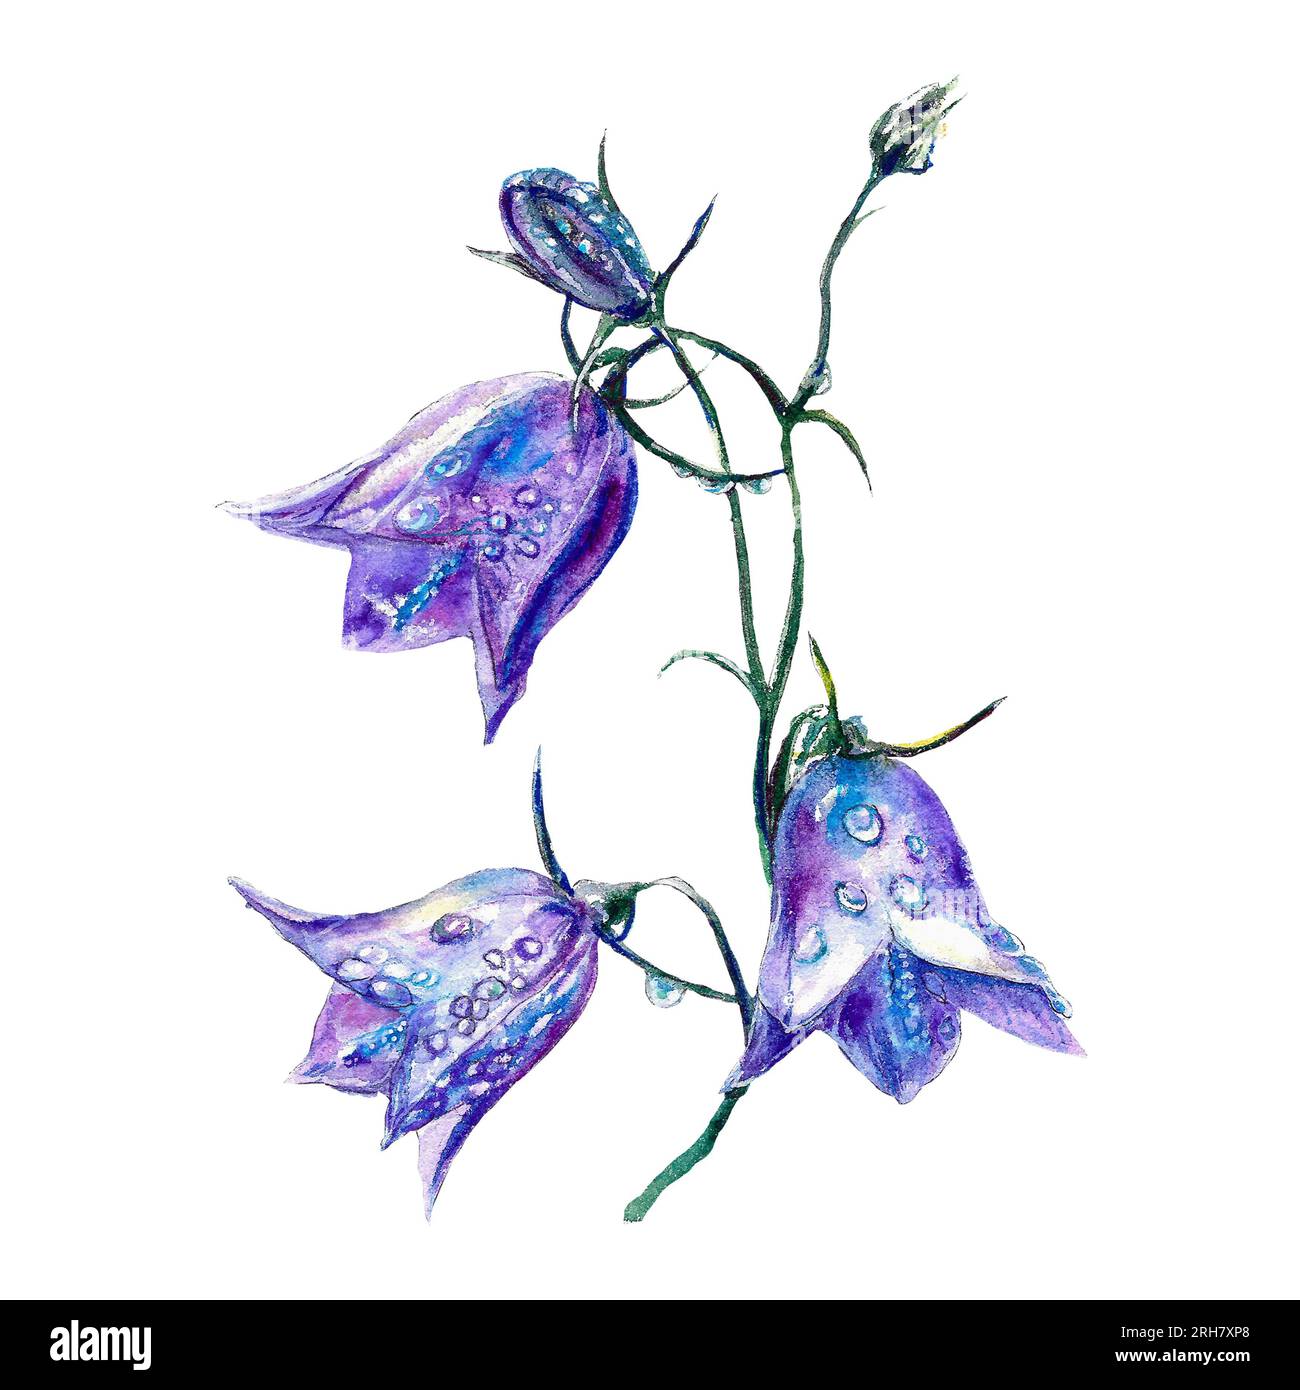 Watercolor blue bells. Meadow flowers botanical illustration isolated on white background. Greeting cards, wedding invitations, summer flyers, covers. Stock Photo